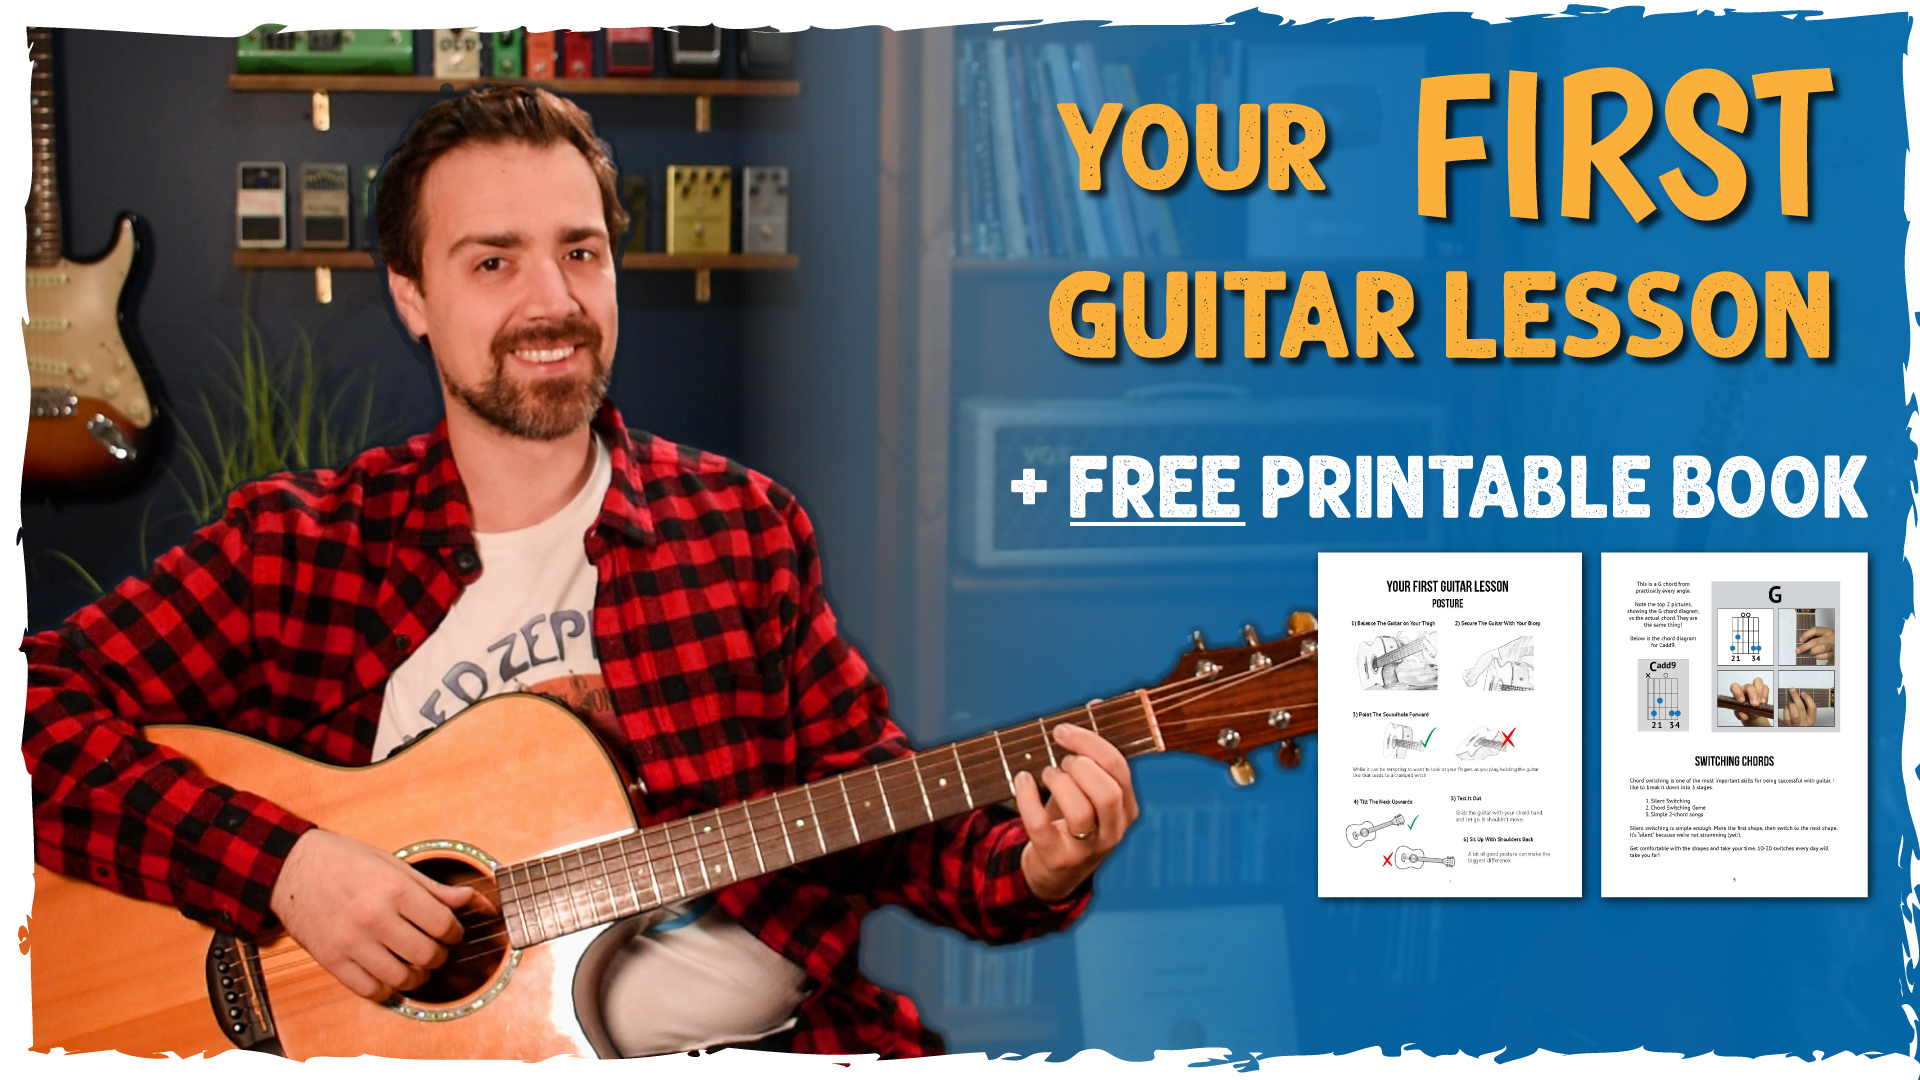 Your first guitar lesson for beginners